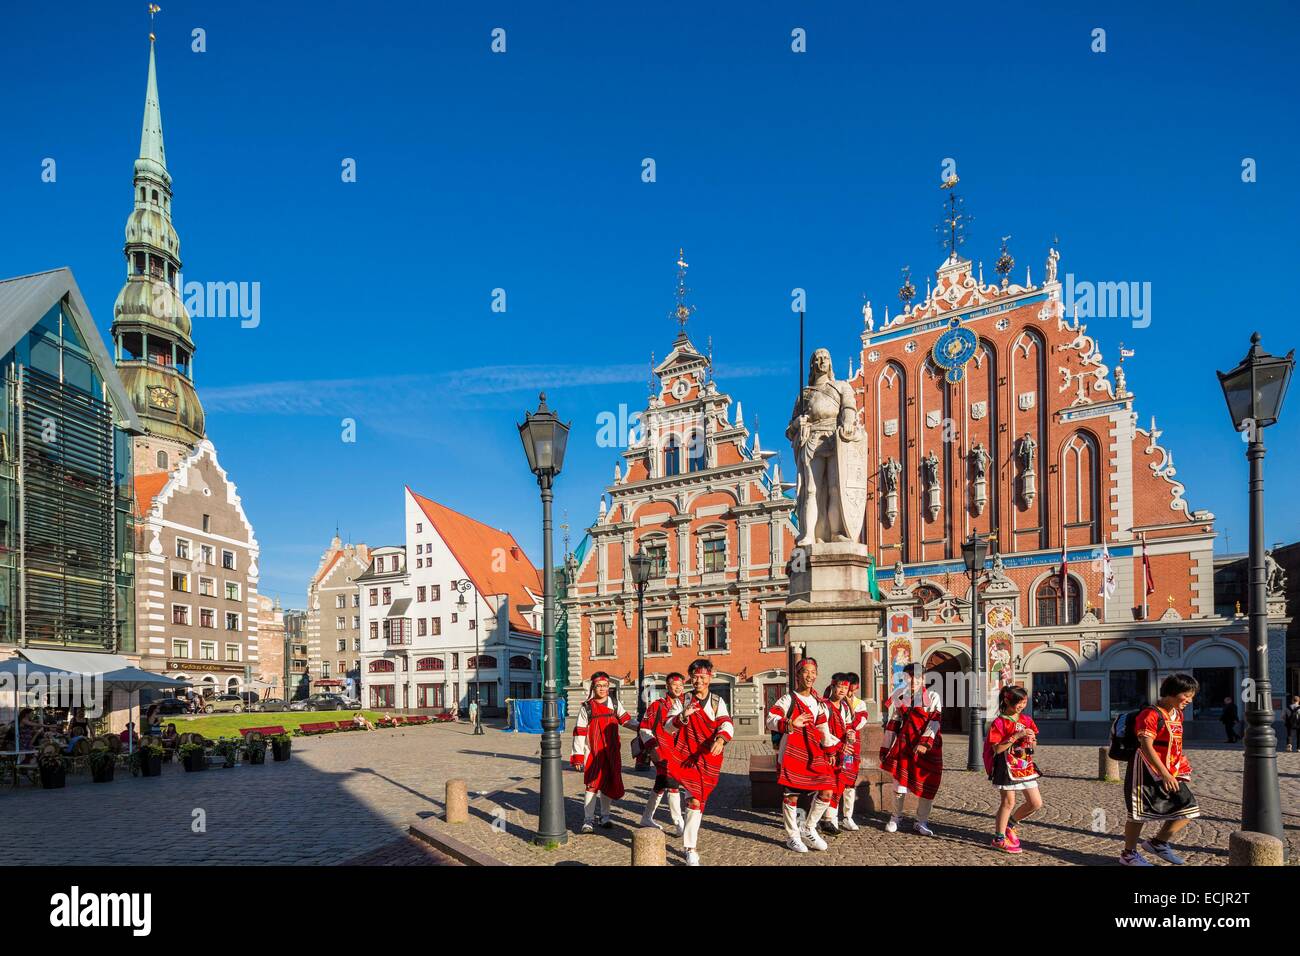 Latvia (Baltic States), Riga, European capital of culture 2014, historical centre listed as World Heritage by UNESCO, Ratslaukums square, the house of the blackheads, view of Saint Peter's Lutheran Church Stock Photo